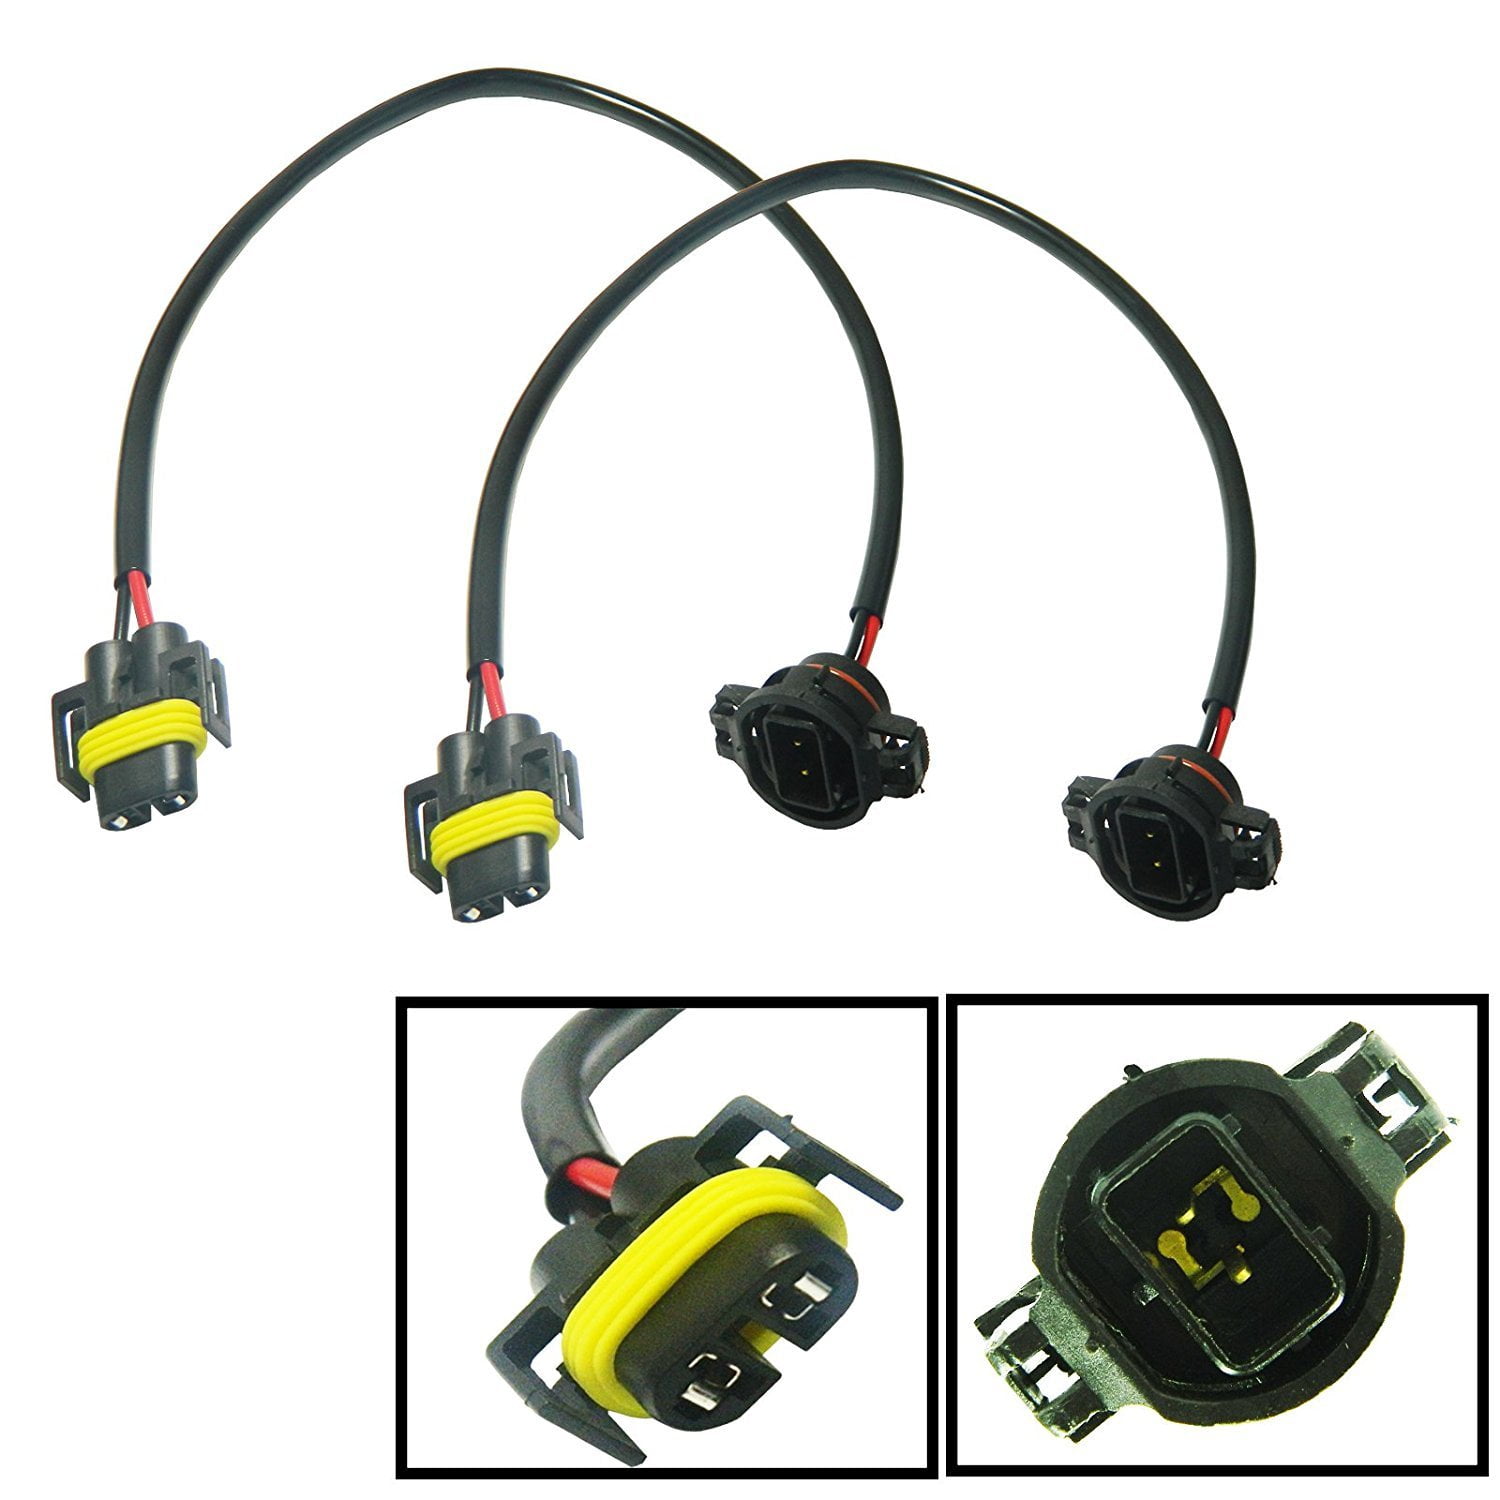 5202 2504 H16 to H11 880 H8 Conversion Harness Cable Socket Plug Adapter Wires